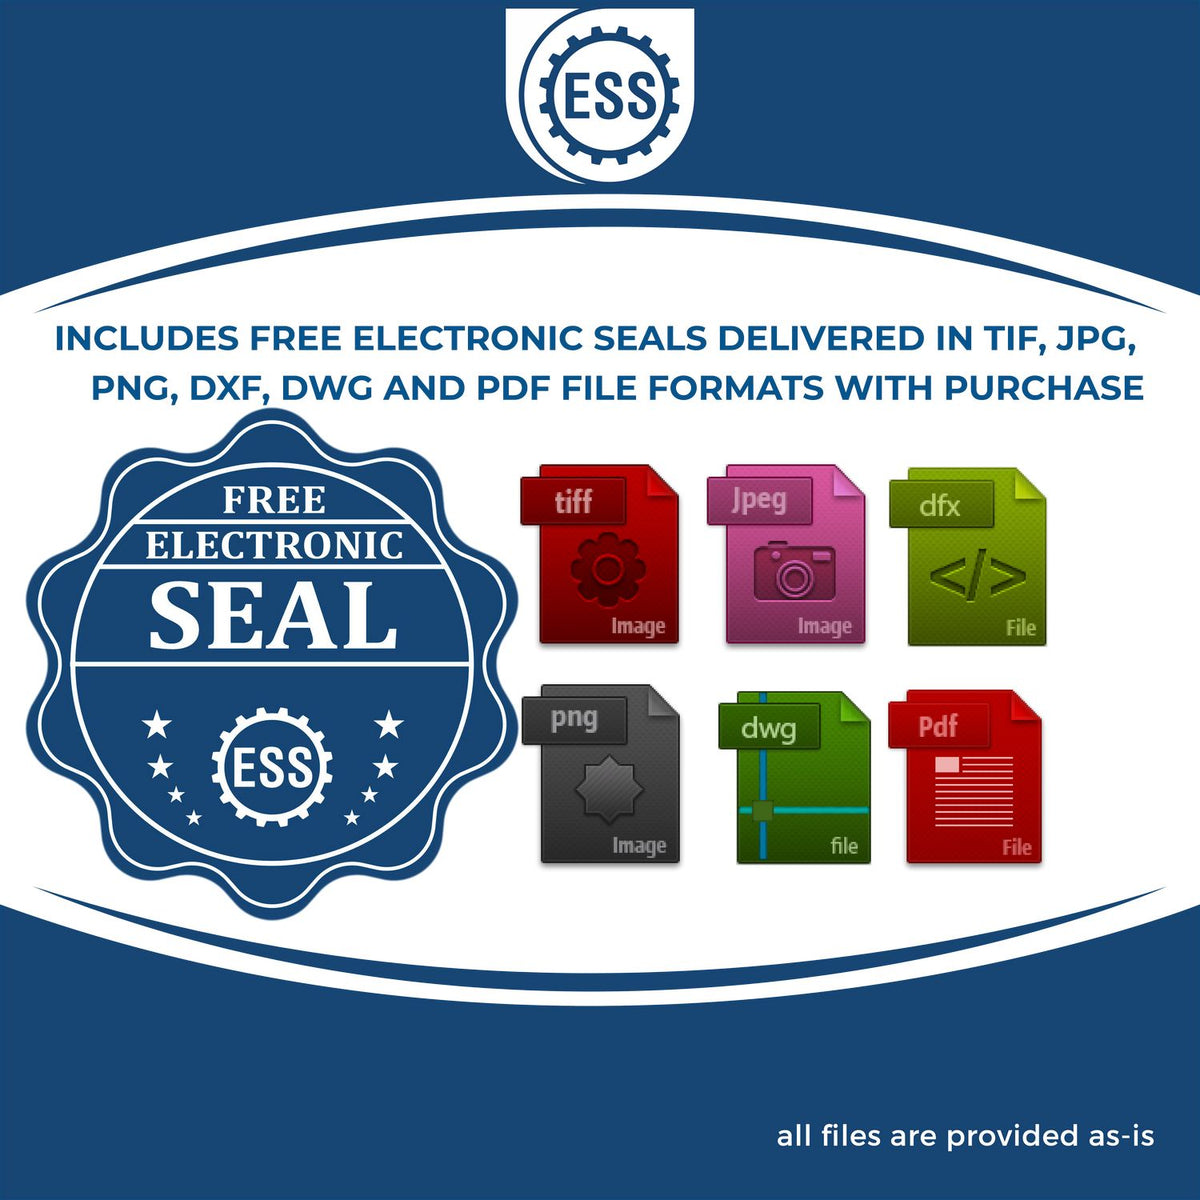 An infographic for the free electronic seal for the Maryland Professional Geologist Seal Stamp illustrating the different file type icons such as DXF, DWG, TIF, JPG and PNG.